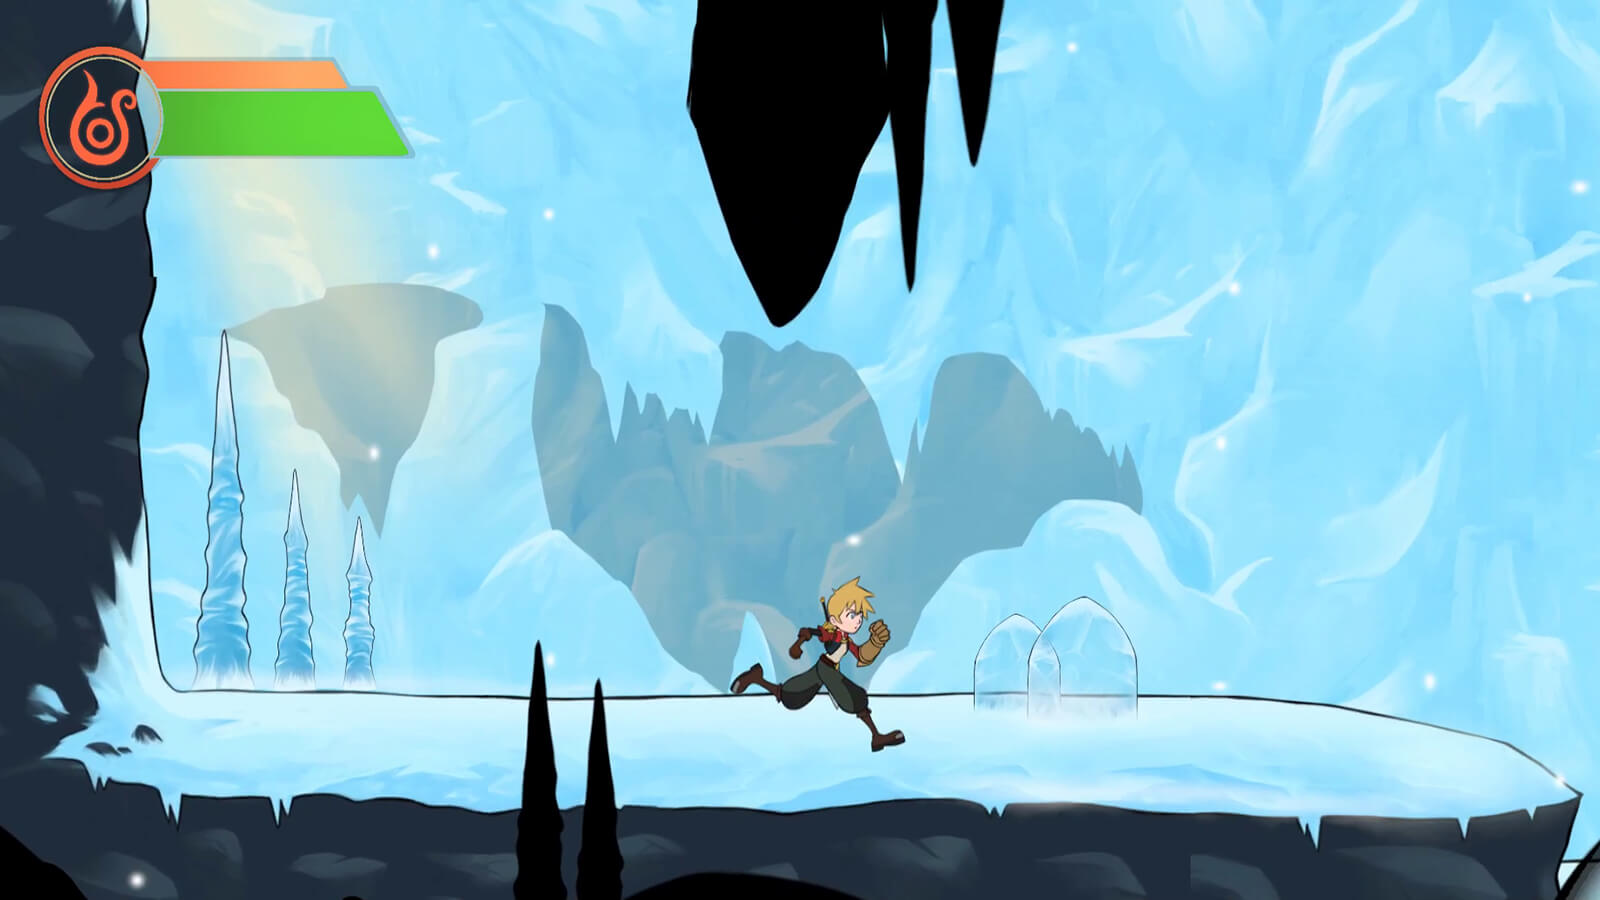 A 2D-animated character wielding a large brown gauntlet runs across an icy cavern.